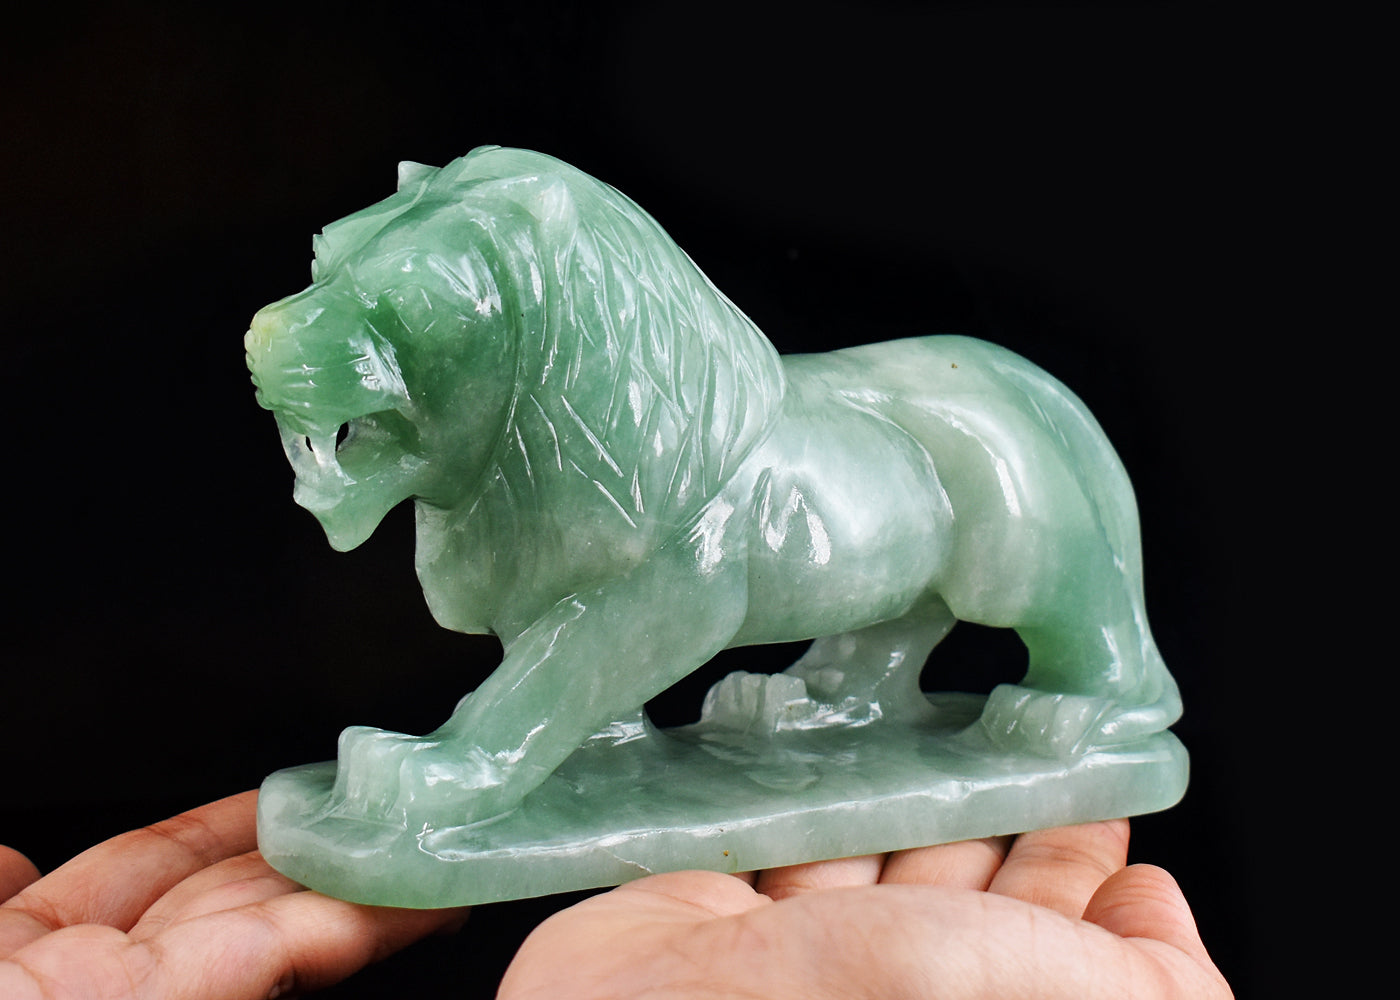 Artisian 4590.00 Cts Genuine Green Aventurine Hand Carved Crystal Gemstone Carving Lion